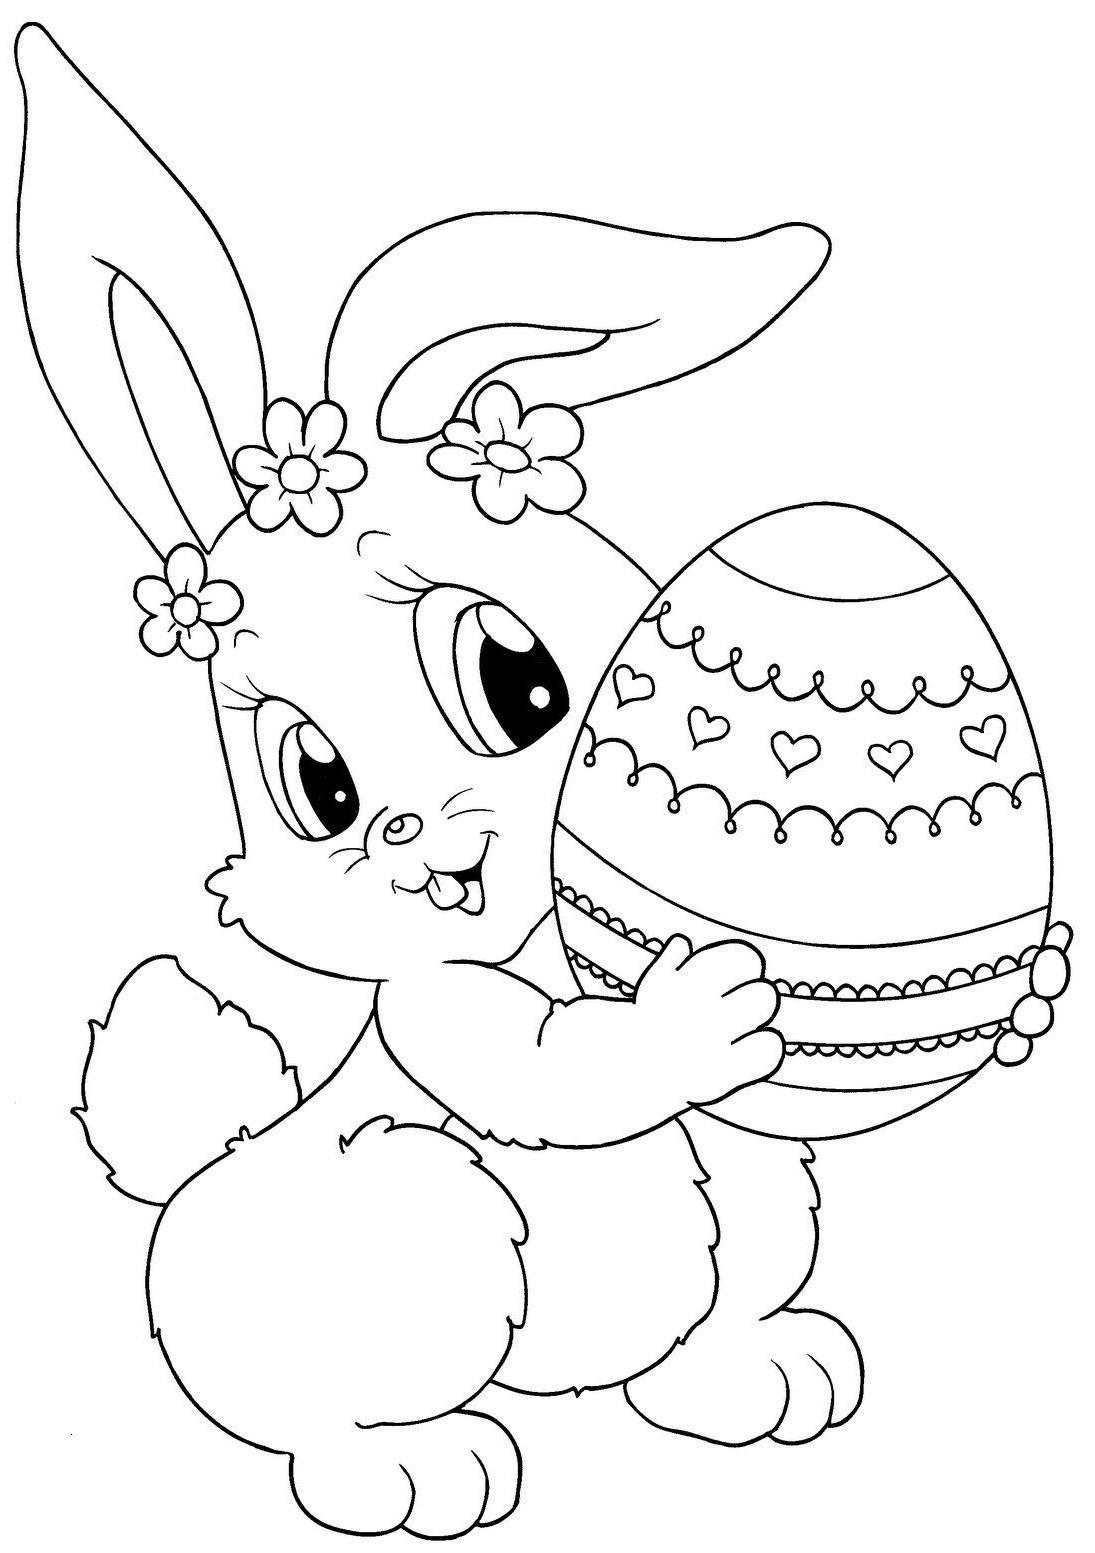 Printable Easter Colorings Free Online Blank Egg Cute | Coloring Pages - Free Printable Easter Coloring Pictures